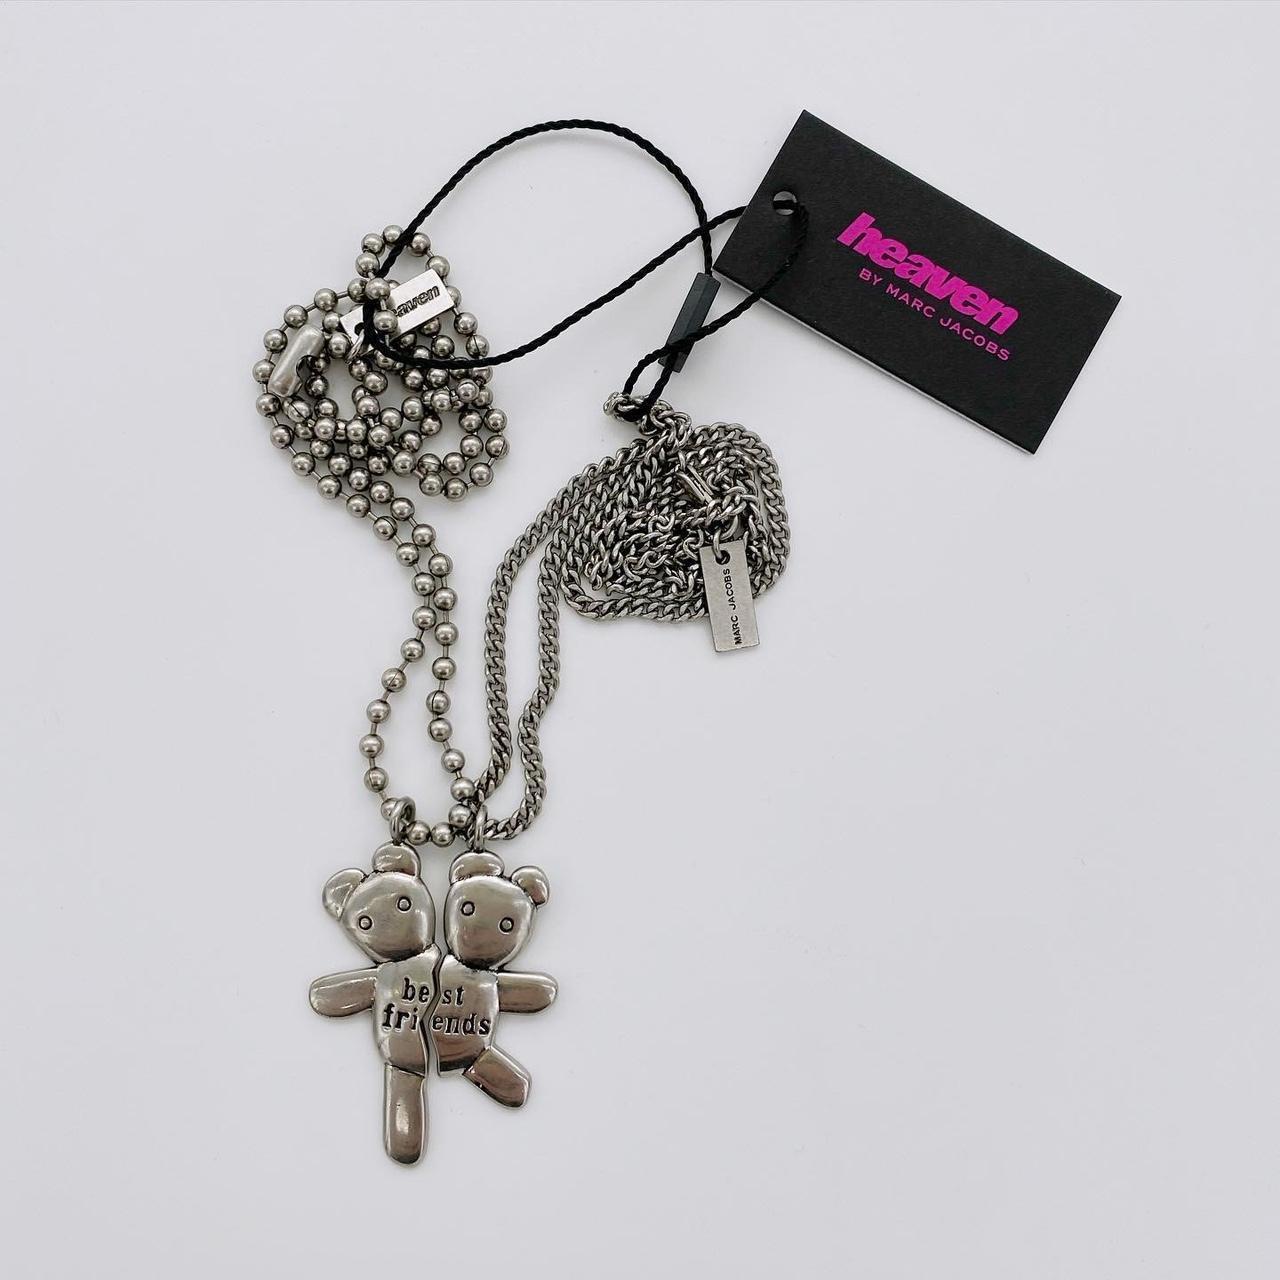 heaven BY MARCJACOBS friendship necklace